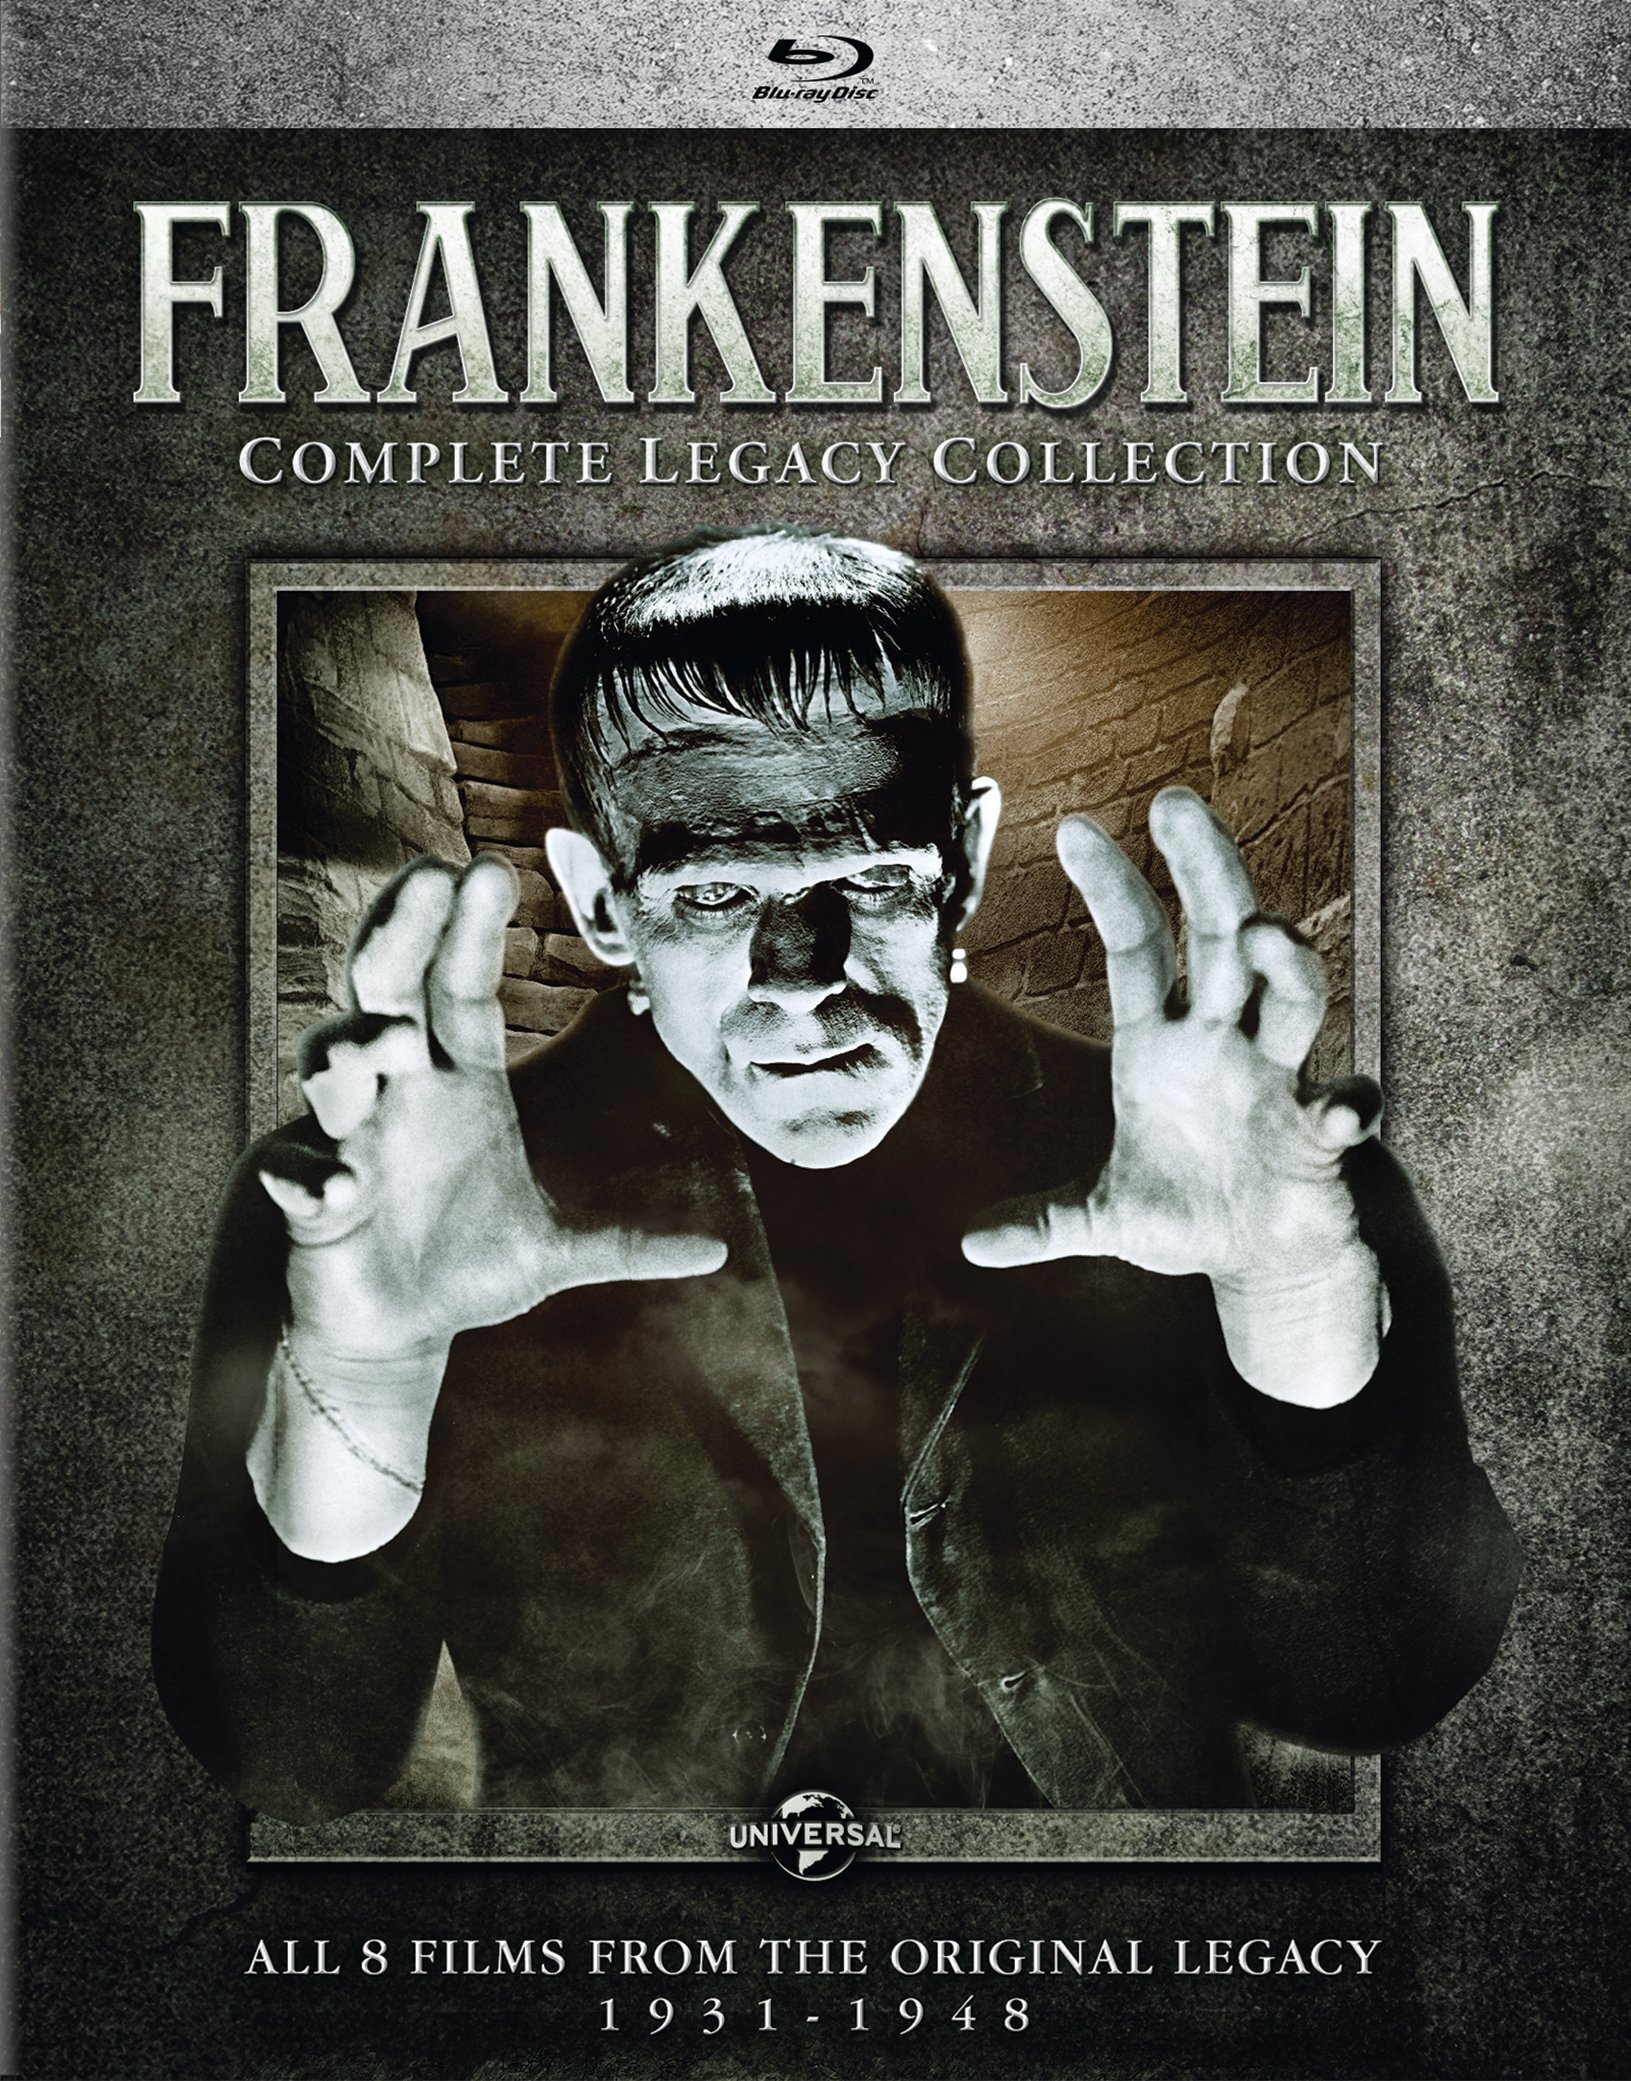 Frankenstein Complete Legacy Bluray Collection